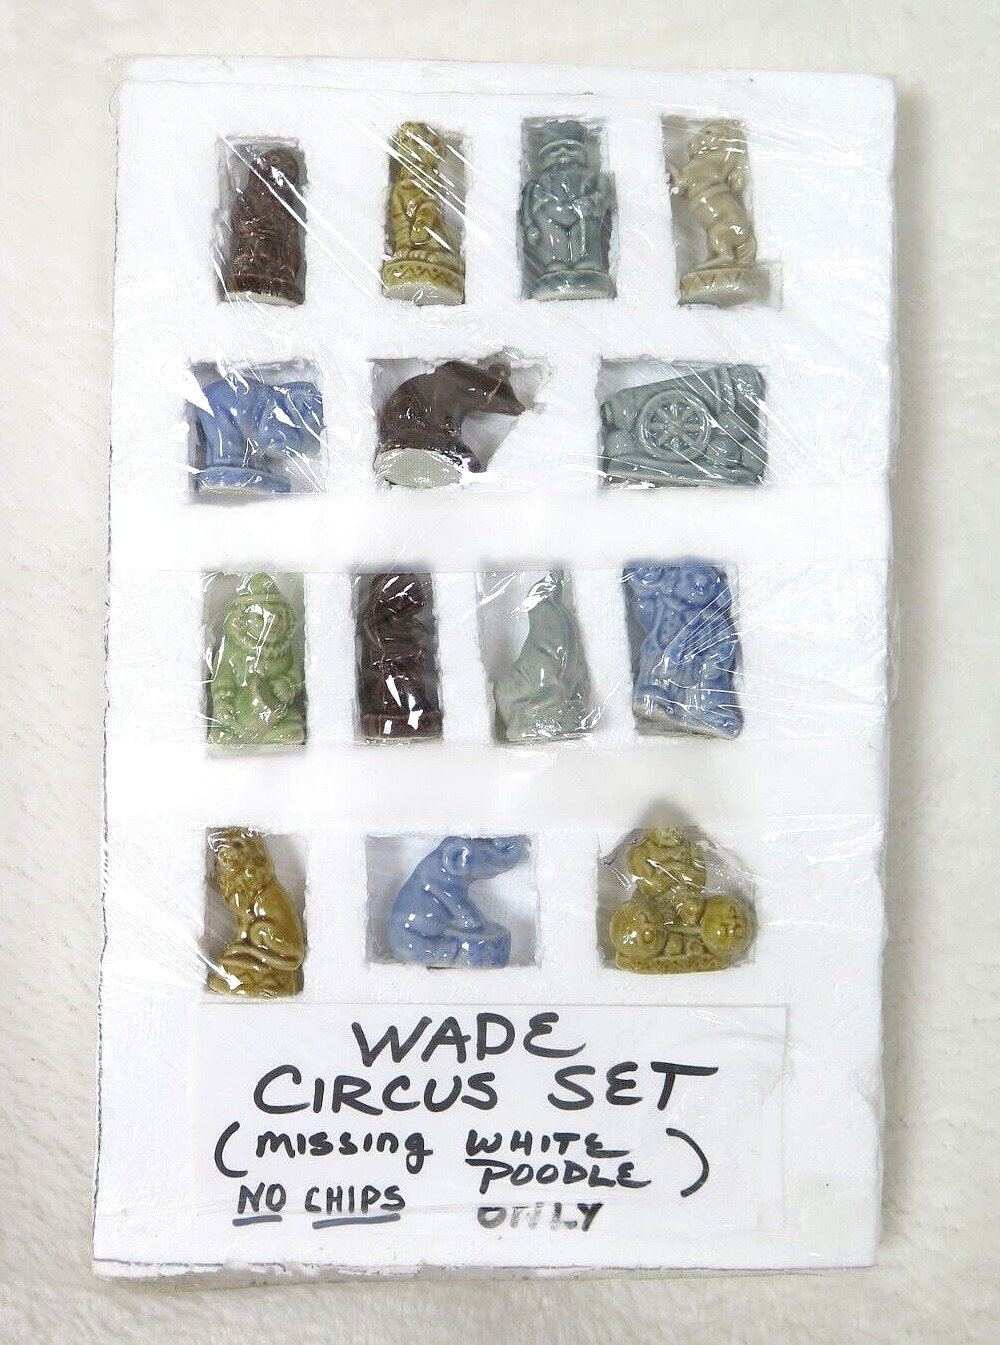 Wade Tea Figures Circus Set of 14 Figurines Missing White Poodle No Chips VTG